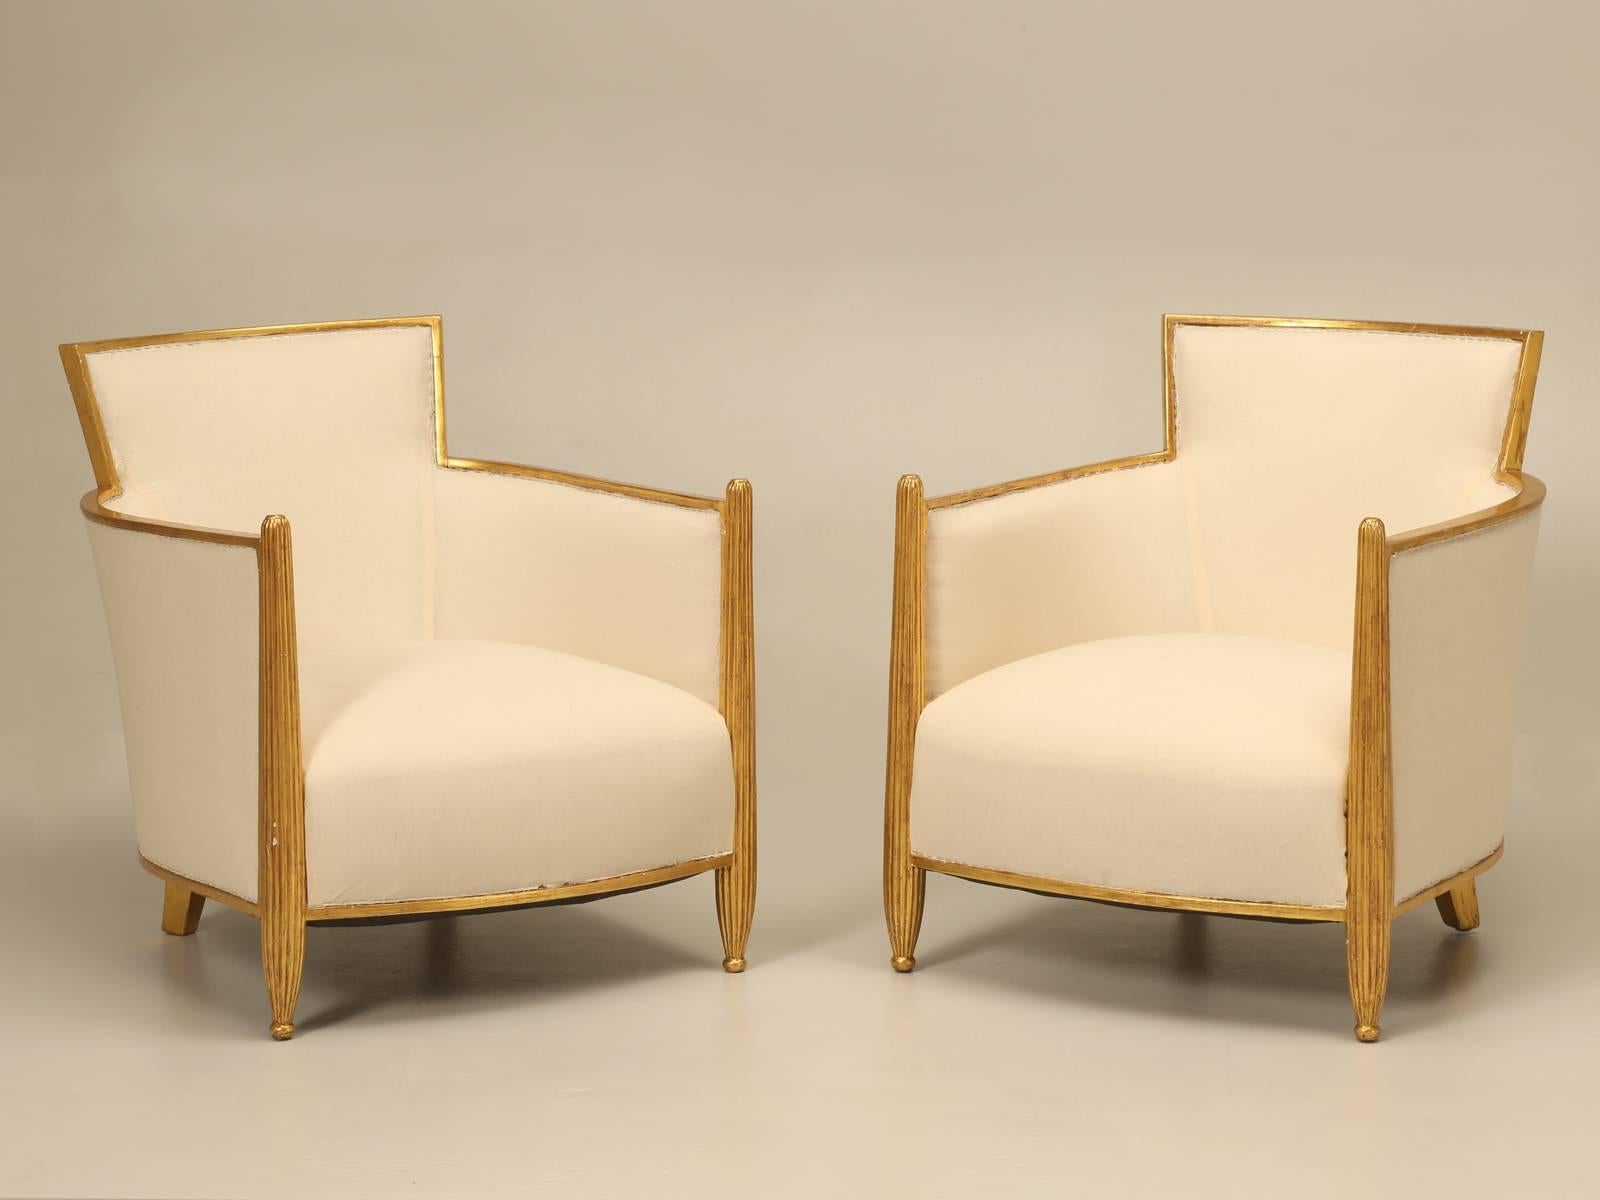 The absolute height of 1940s design still wearing their original 24-karat water gilded frames, that have not been touched up with paint. The Old Plank upholstery department completely stripped the frames to the bare wood, cut and installed wooden